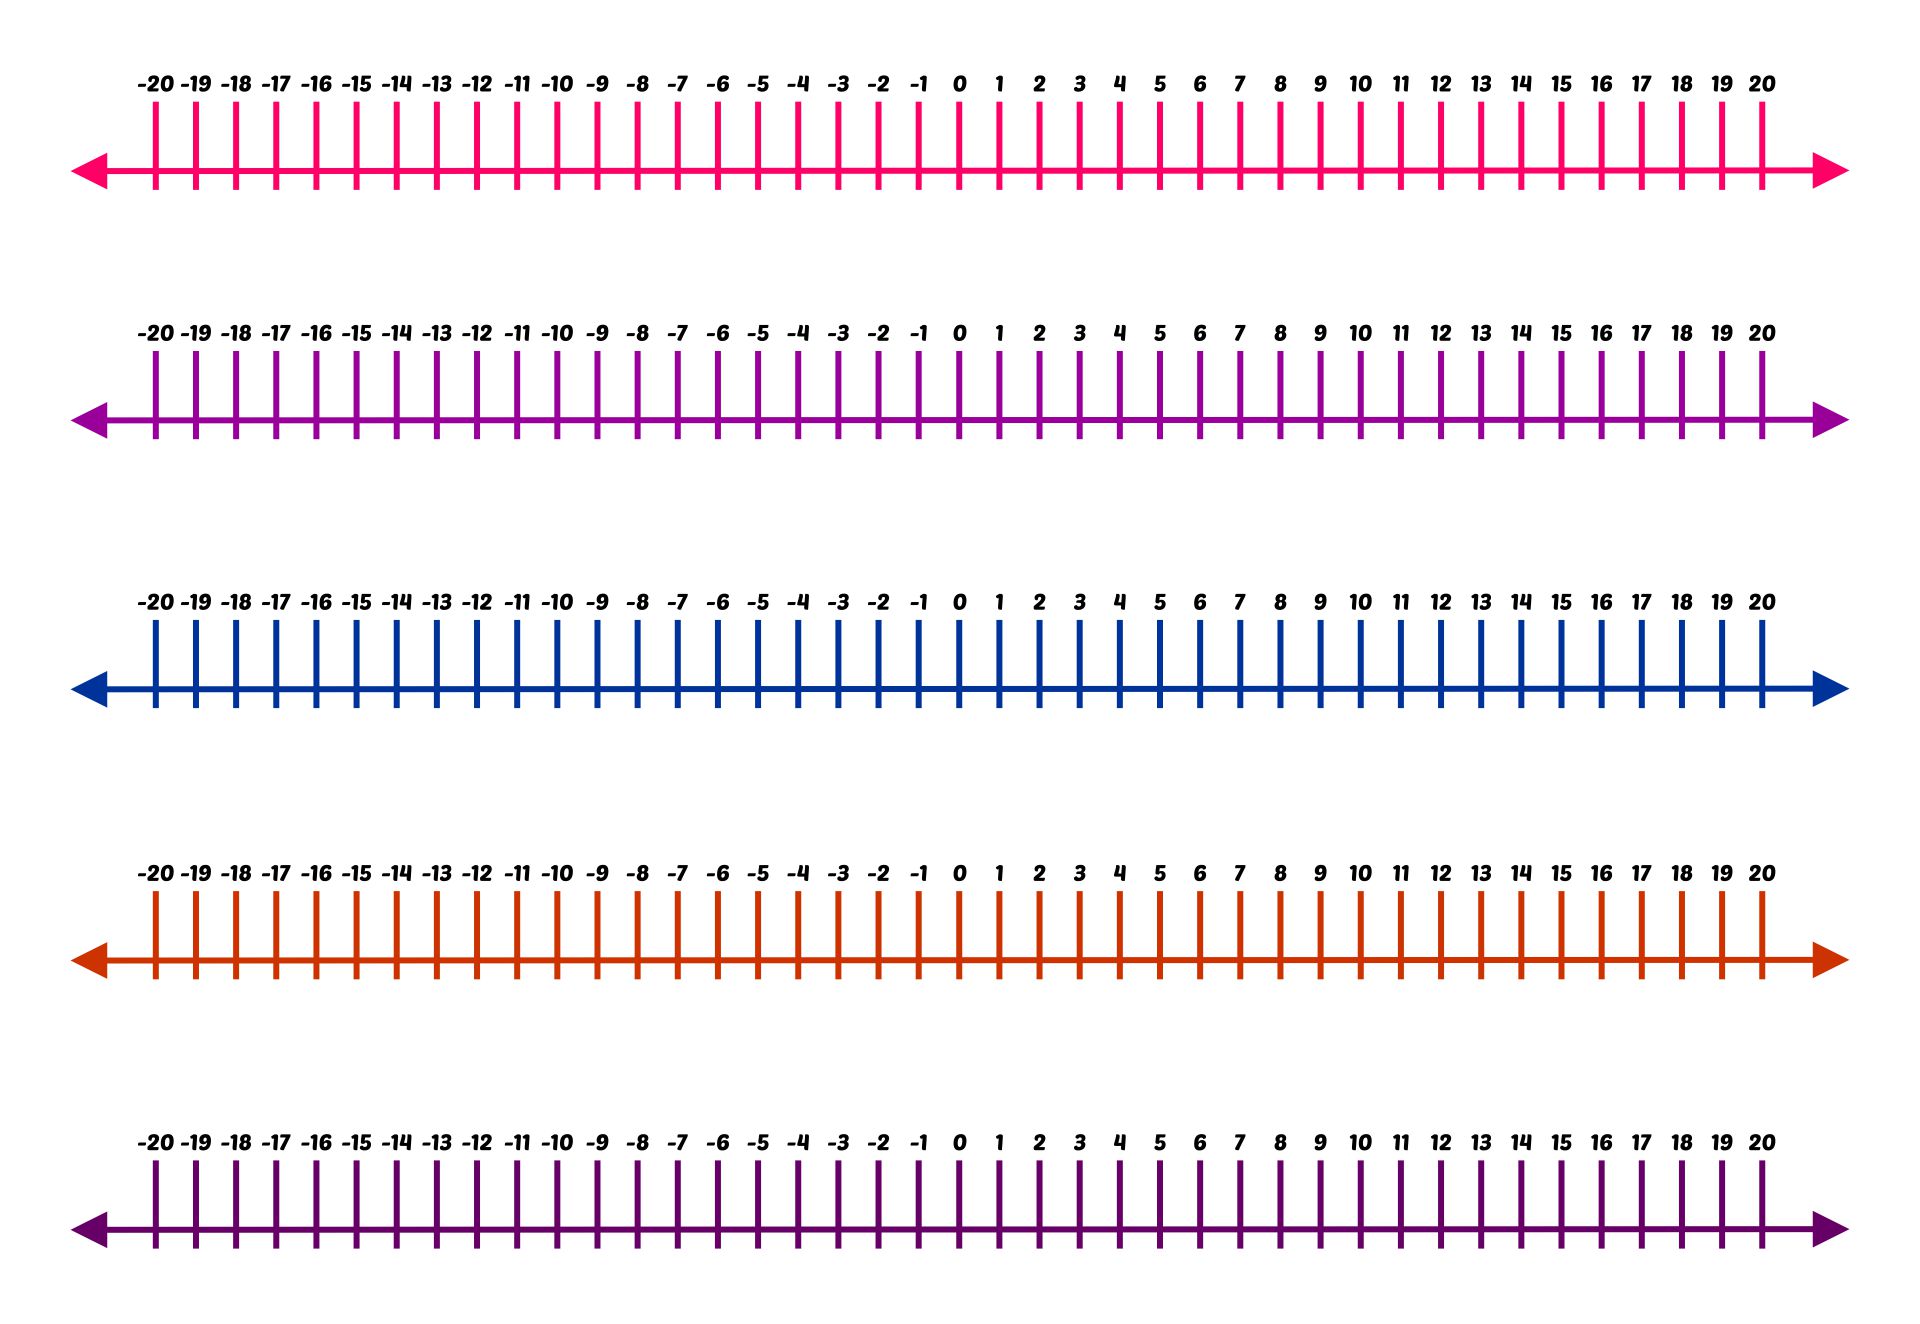 number-lines-positive-and-negative-printable